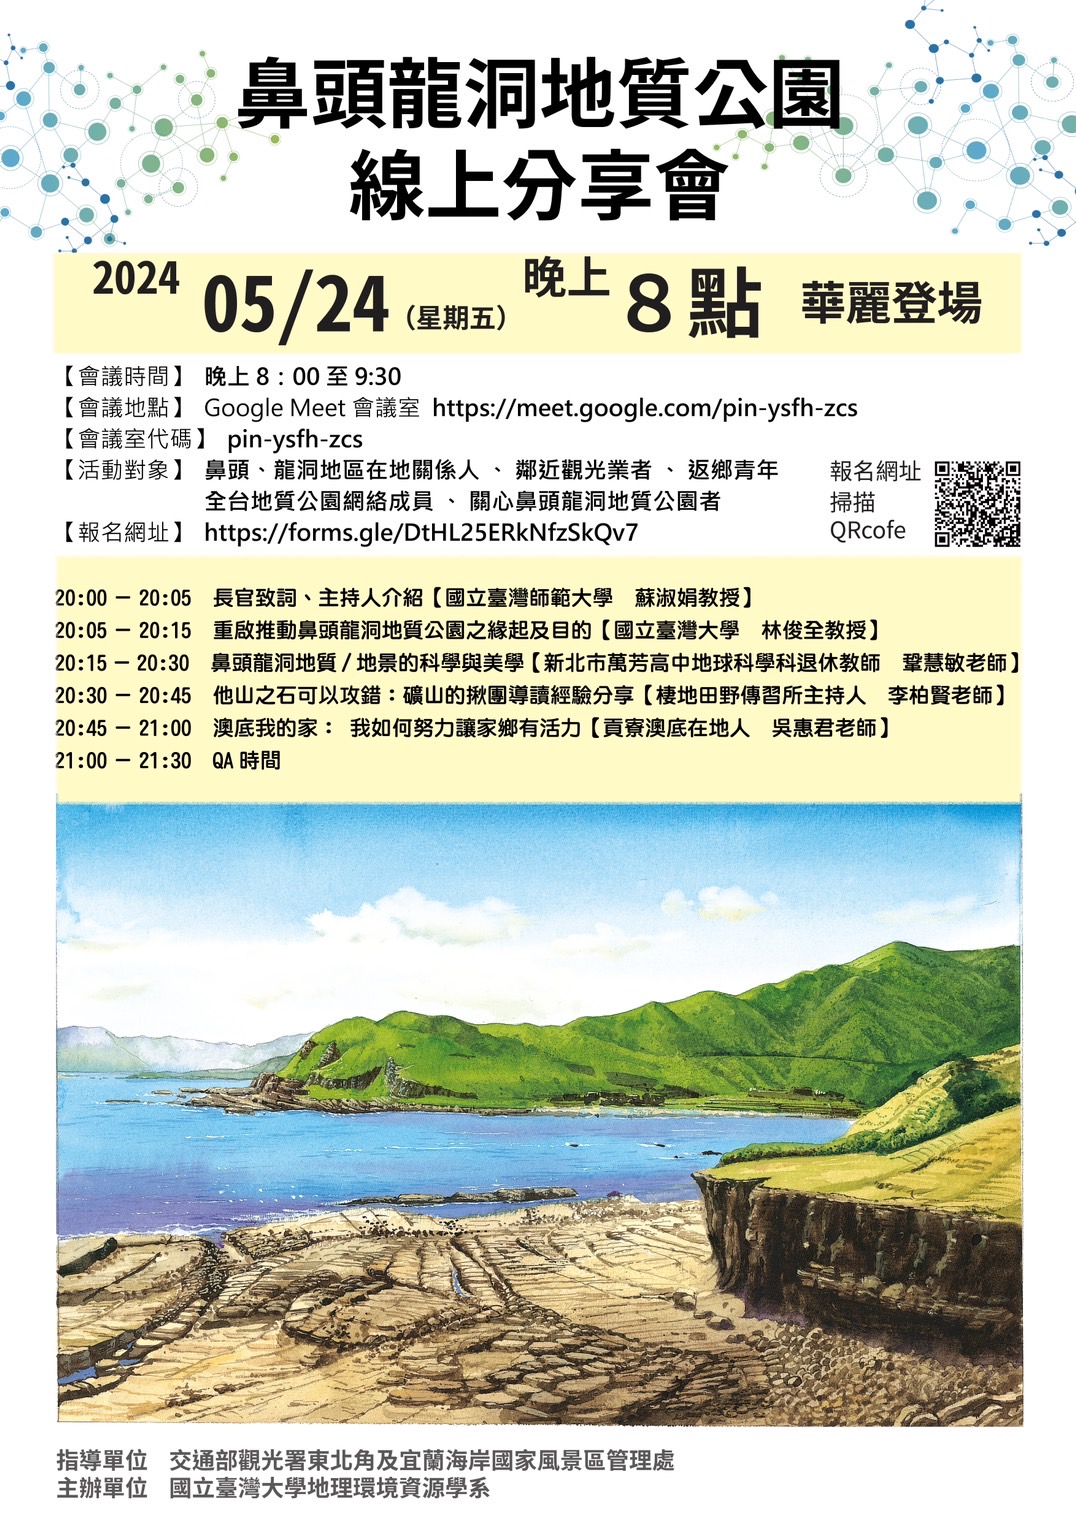 113 Bitoulongdong Geopark Online Sharing Session 📣 will be held on the evening of 5/24. Everyone is welcome to participate!